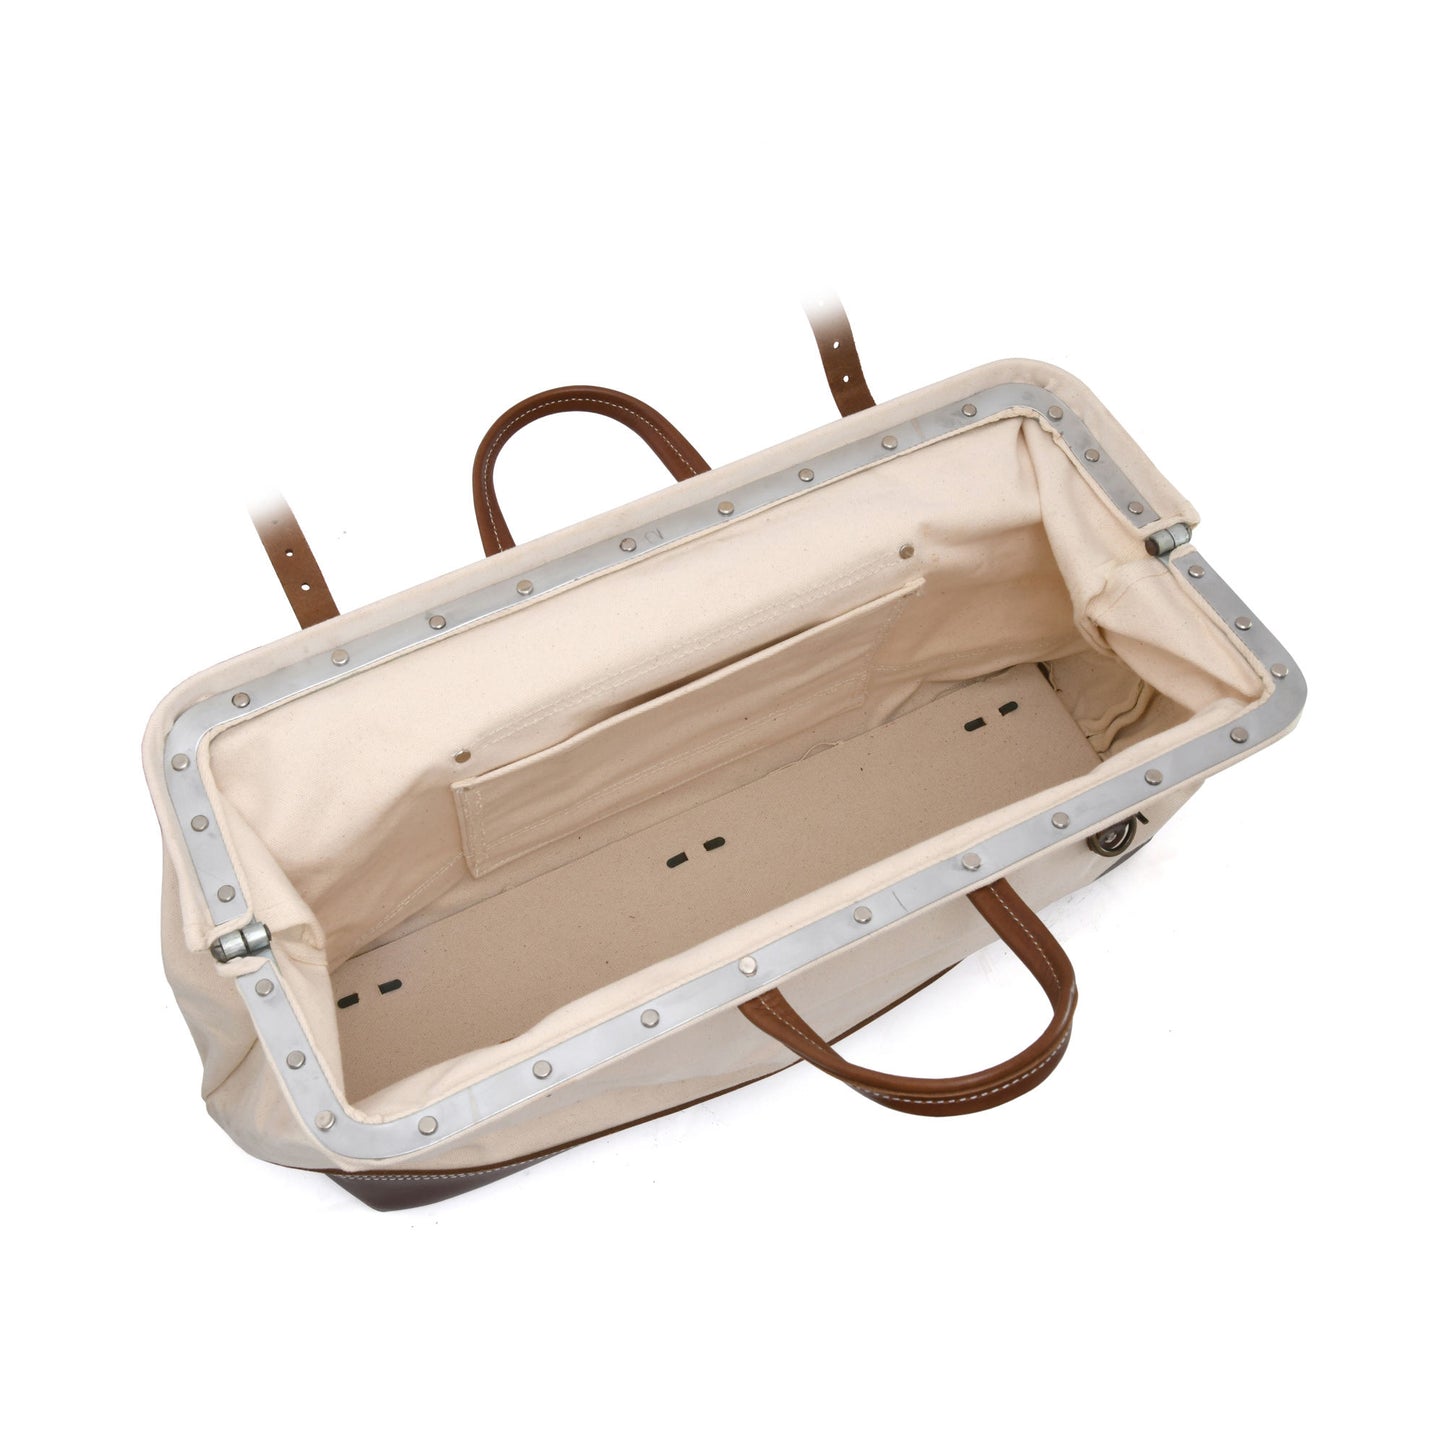 Style n Craft 97517 - 20 Inch Mason's Tool Bag in White Canvas and Dark Tan Full Grain Leather Combination - Open Inside View Showing the Metal Frame, Inside Back Wall Pocket and the Fiber Lined Bottom